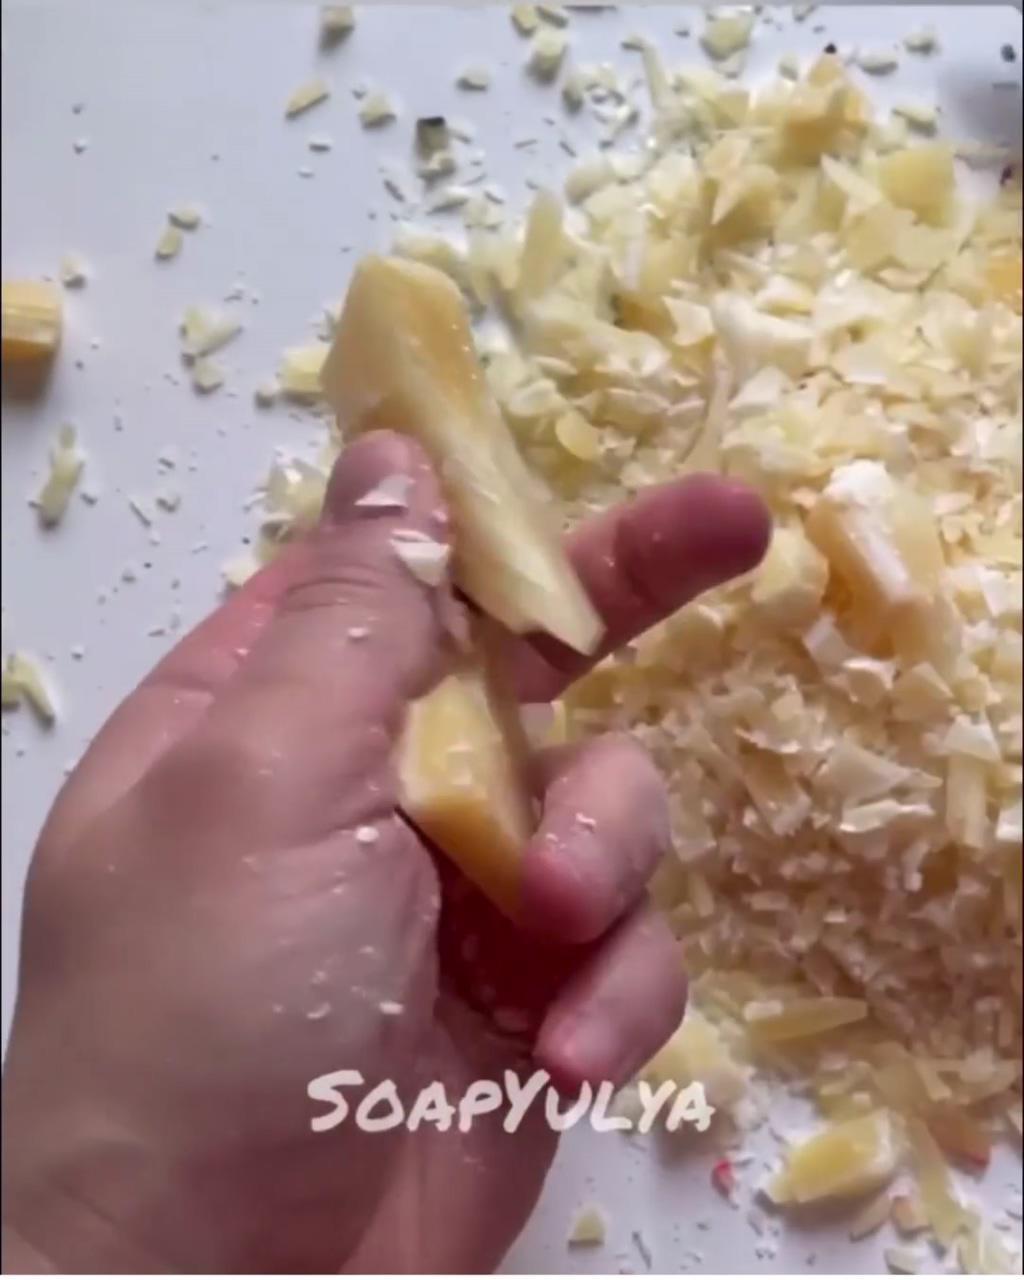 Credits to soapyulya; most satisfying video ever